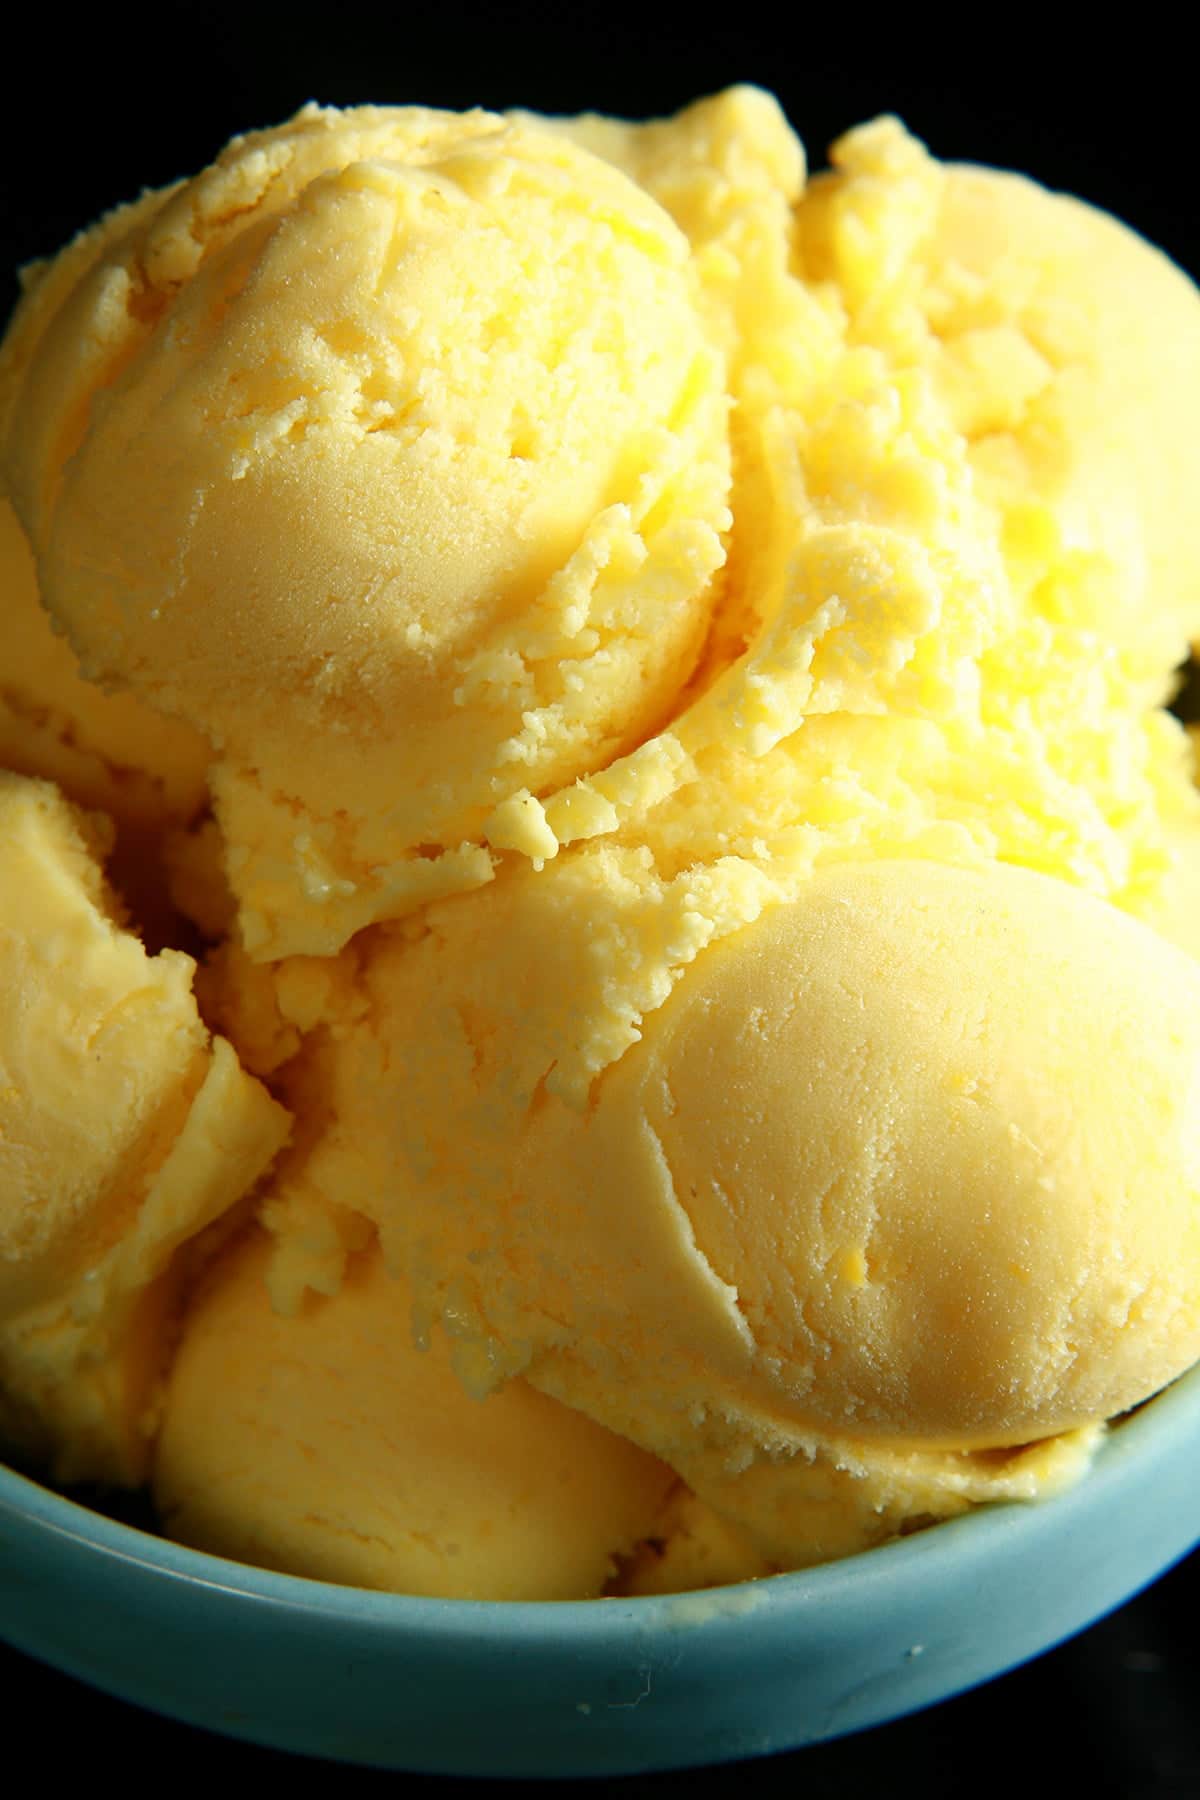 A small blue bowl, piled high with scoops of a yellow coloured sweet corn ice cream.